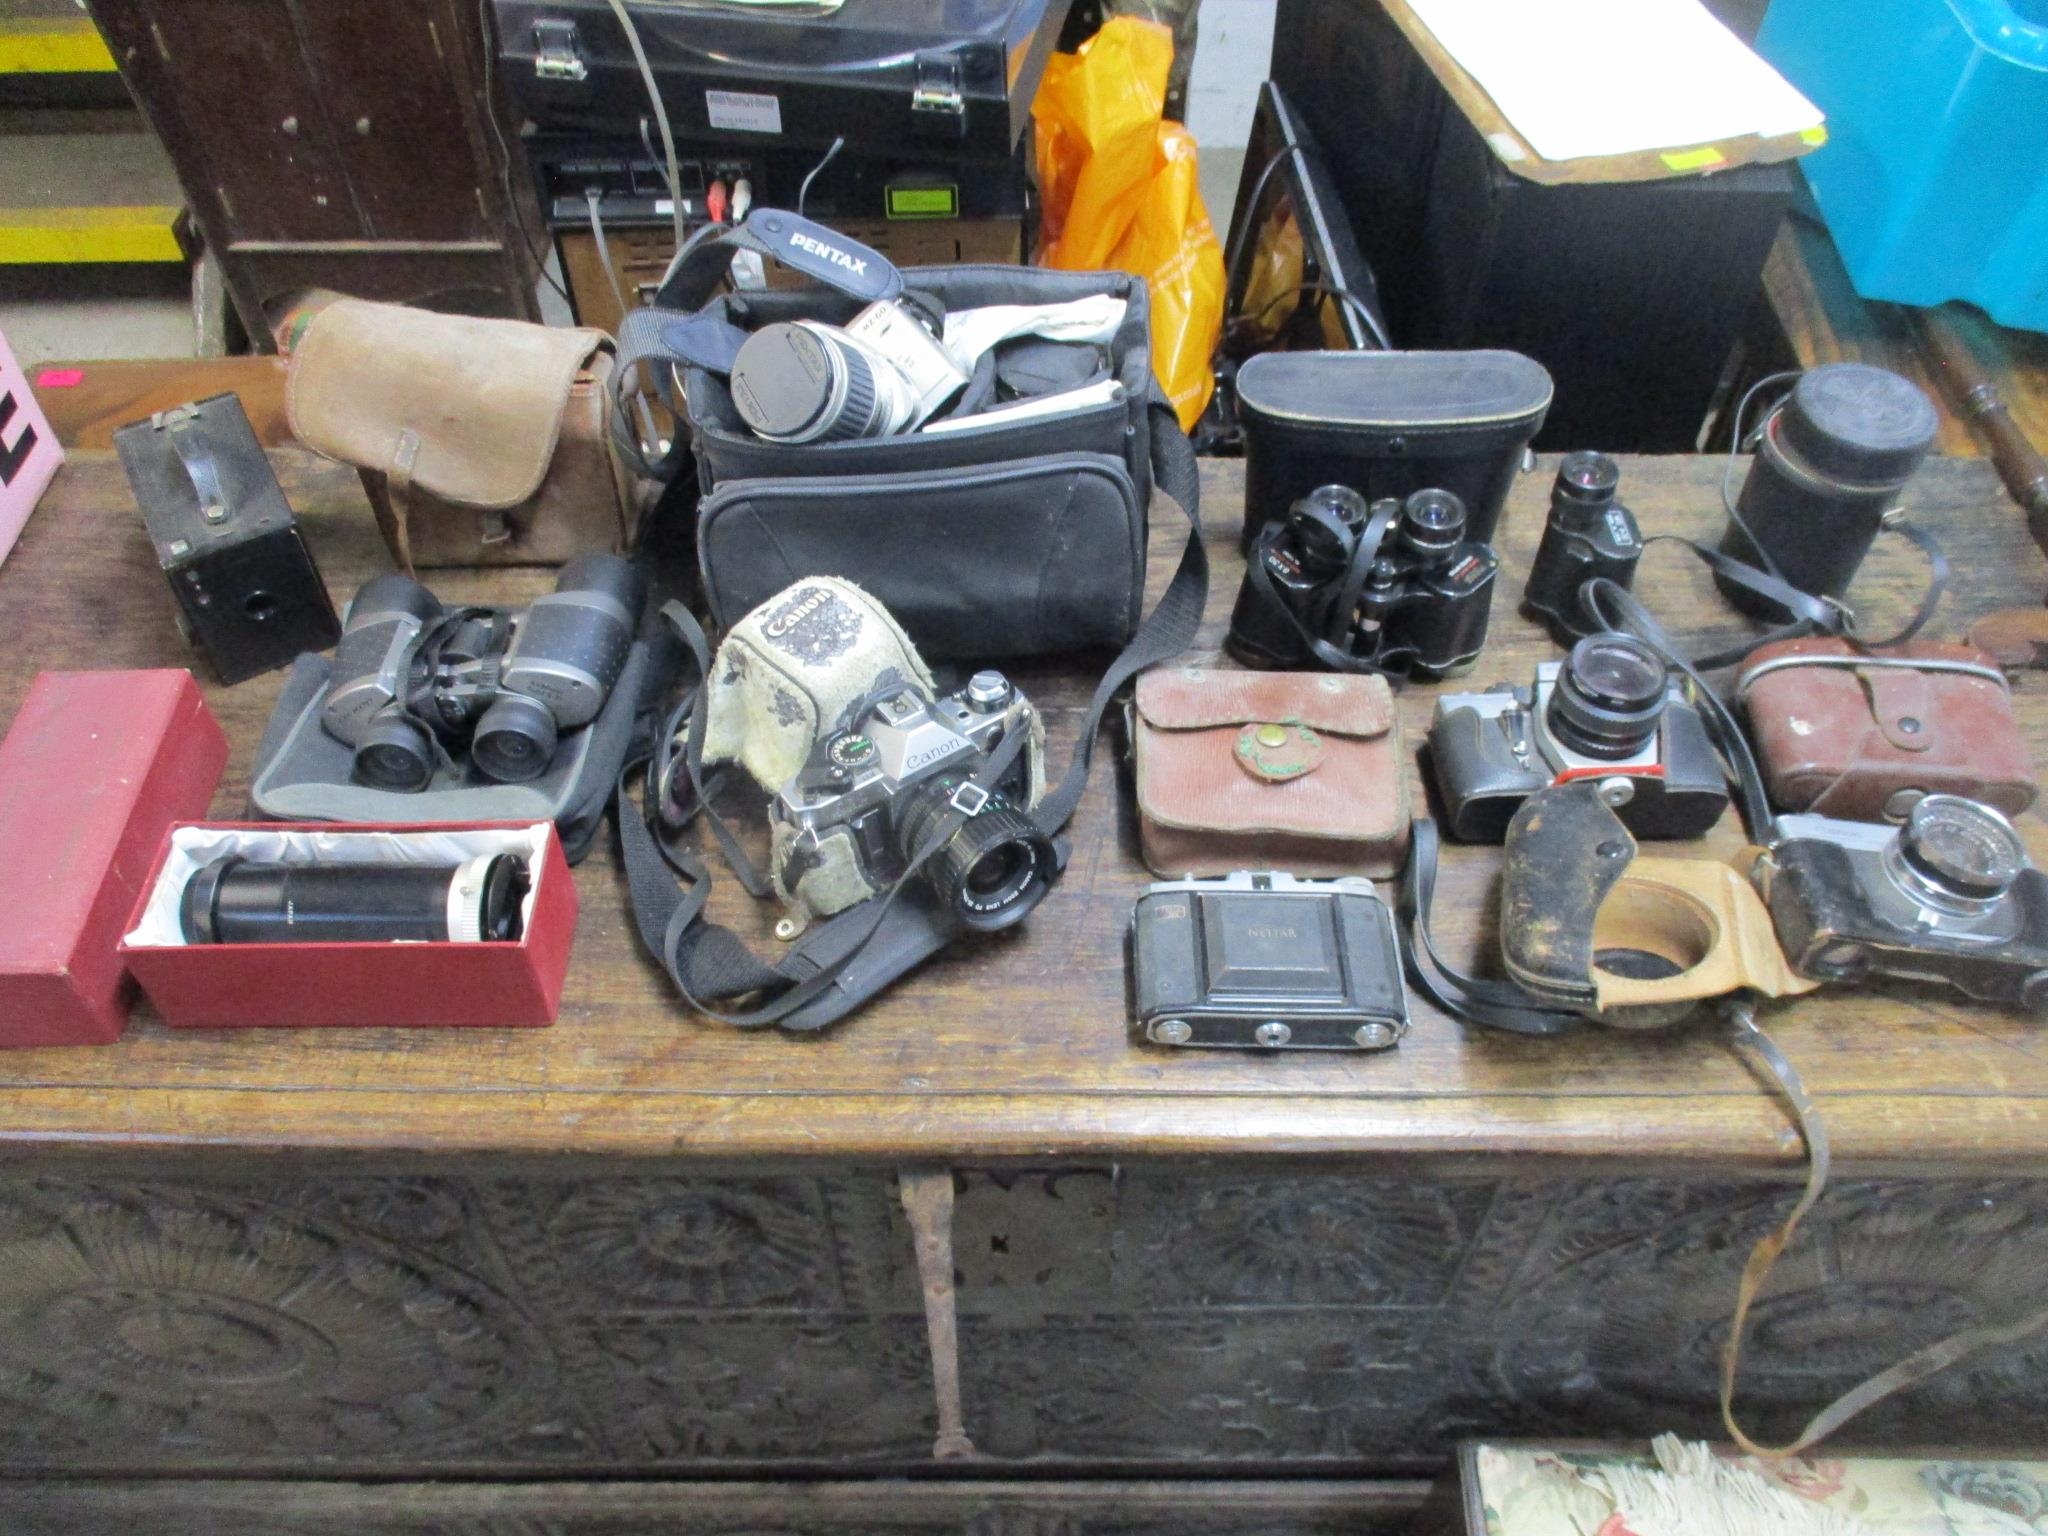 A selection of vintage film cameras, camera accessories, and cased binoculars to include a Nettar